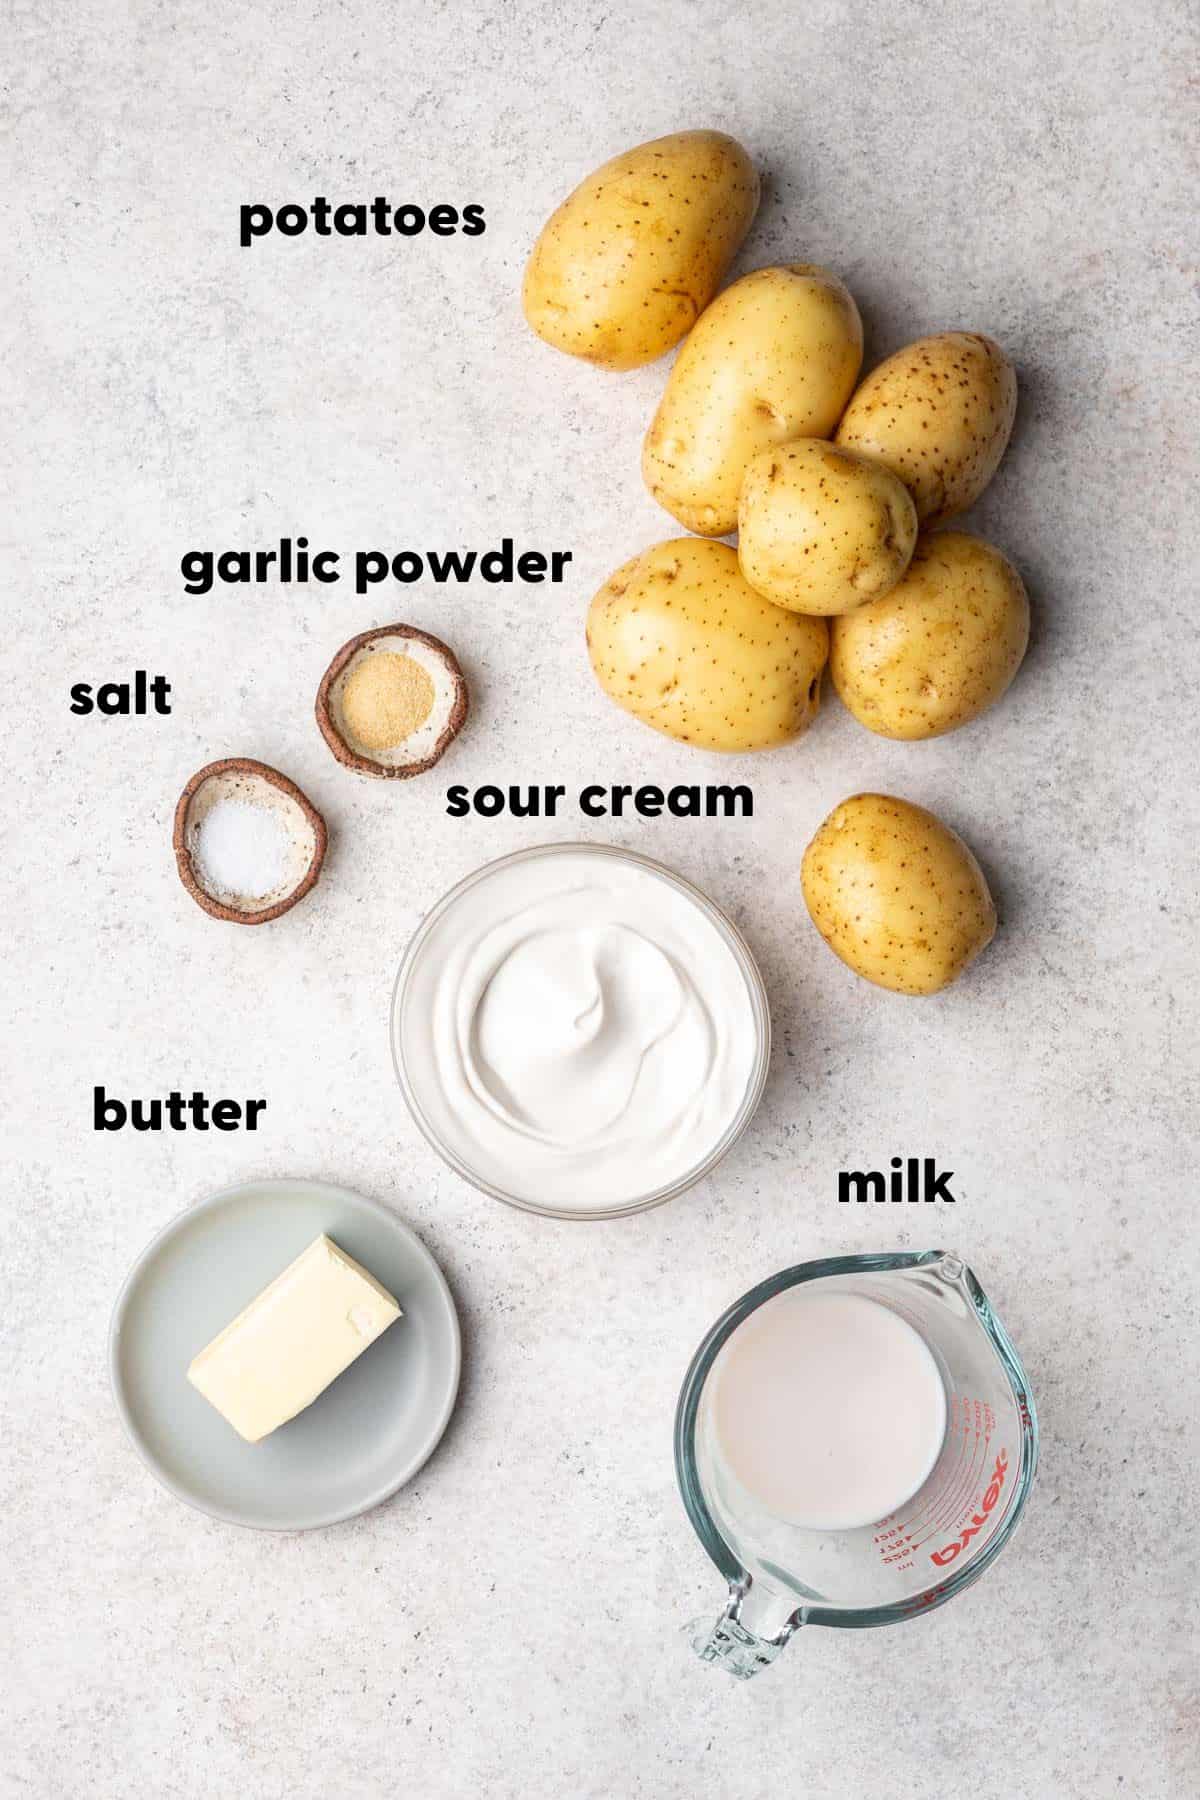 Ingredients you'll need for mashed potatoes measured and labeled.